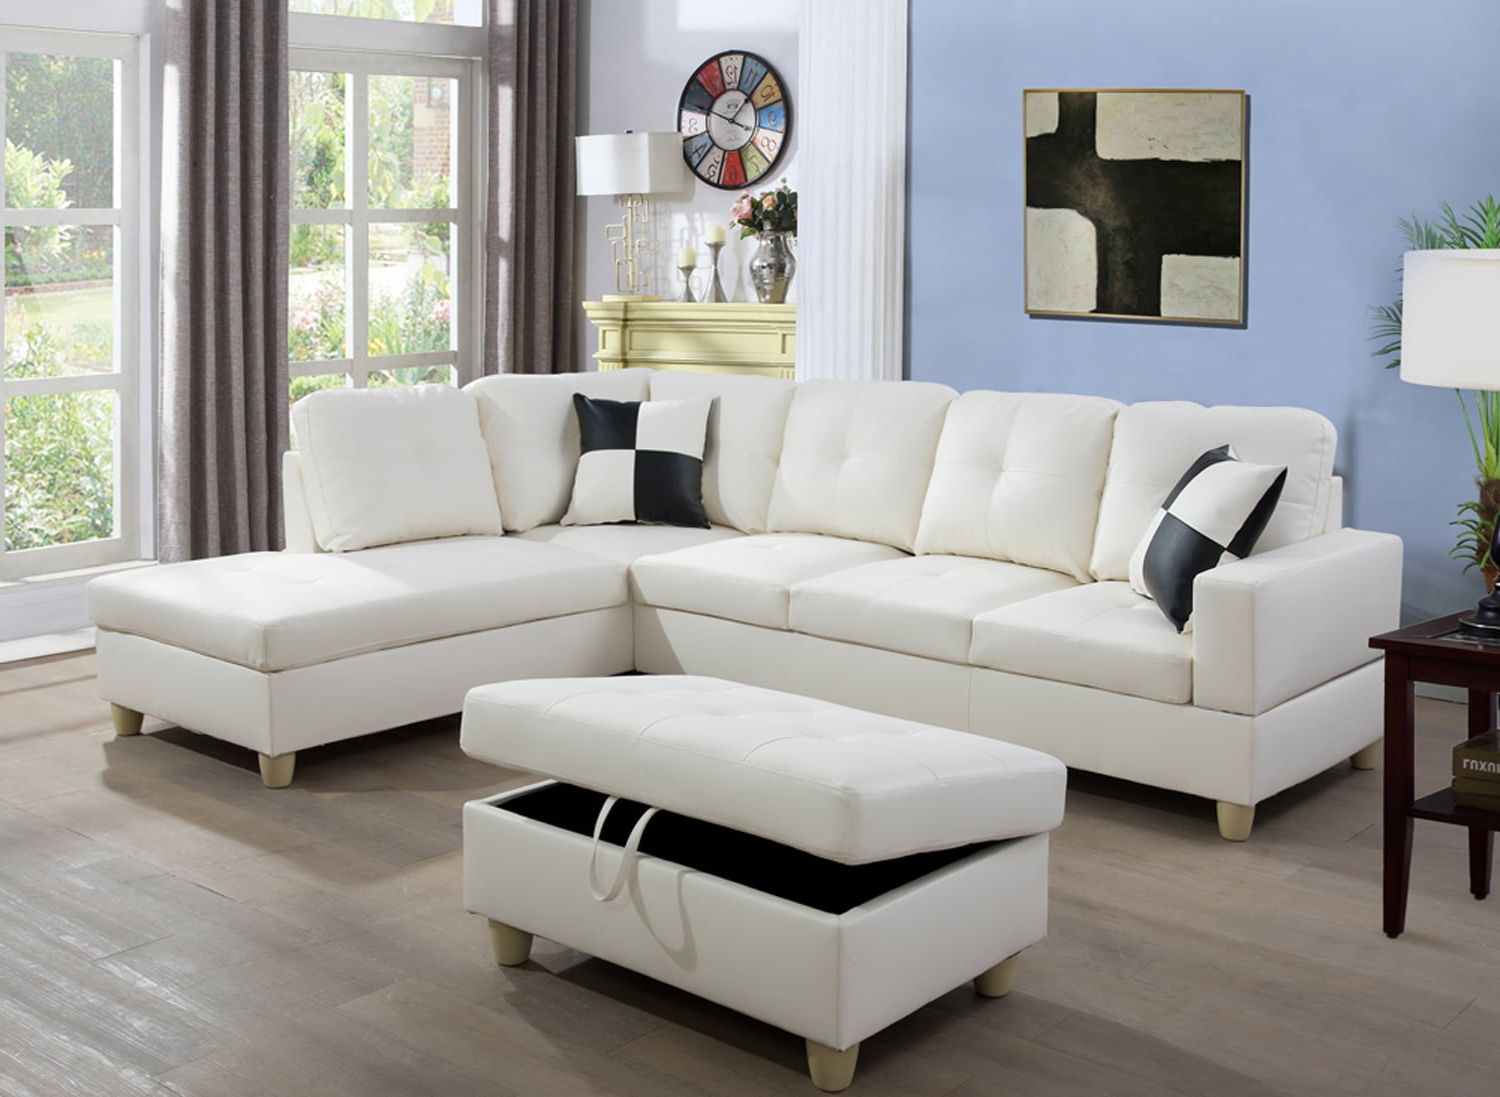 Fashionable Ainehome Faux Leather Sectional Set, Living Room L Shaped Modern Sofa In Sofas With Ottomans (View 7 of 15)